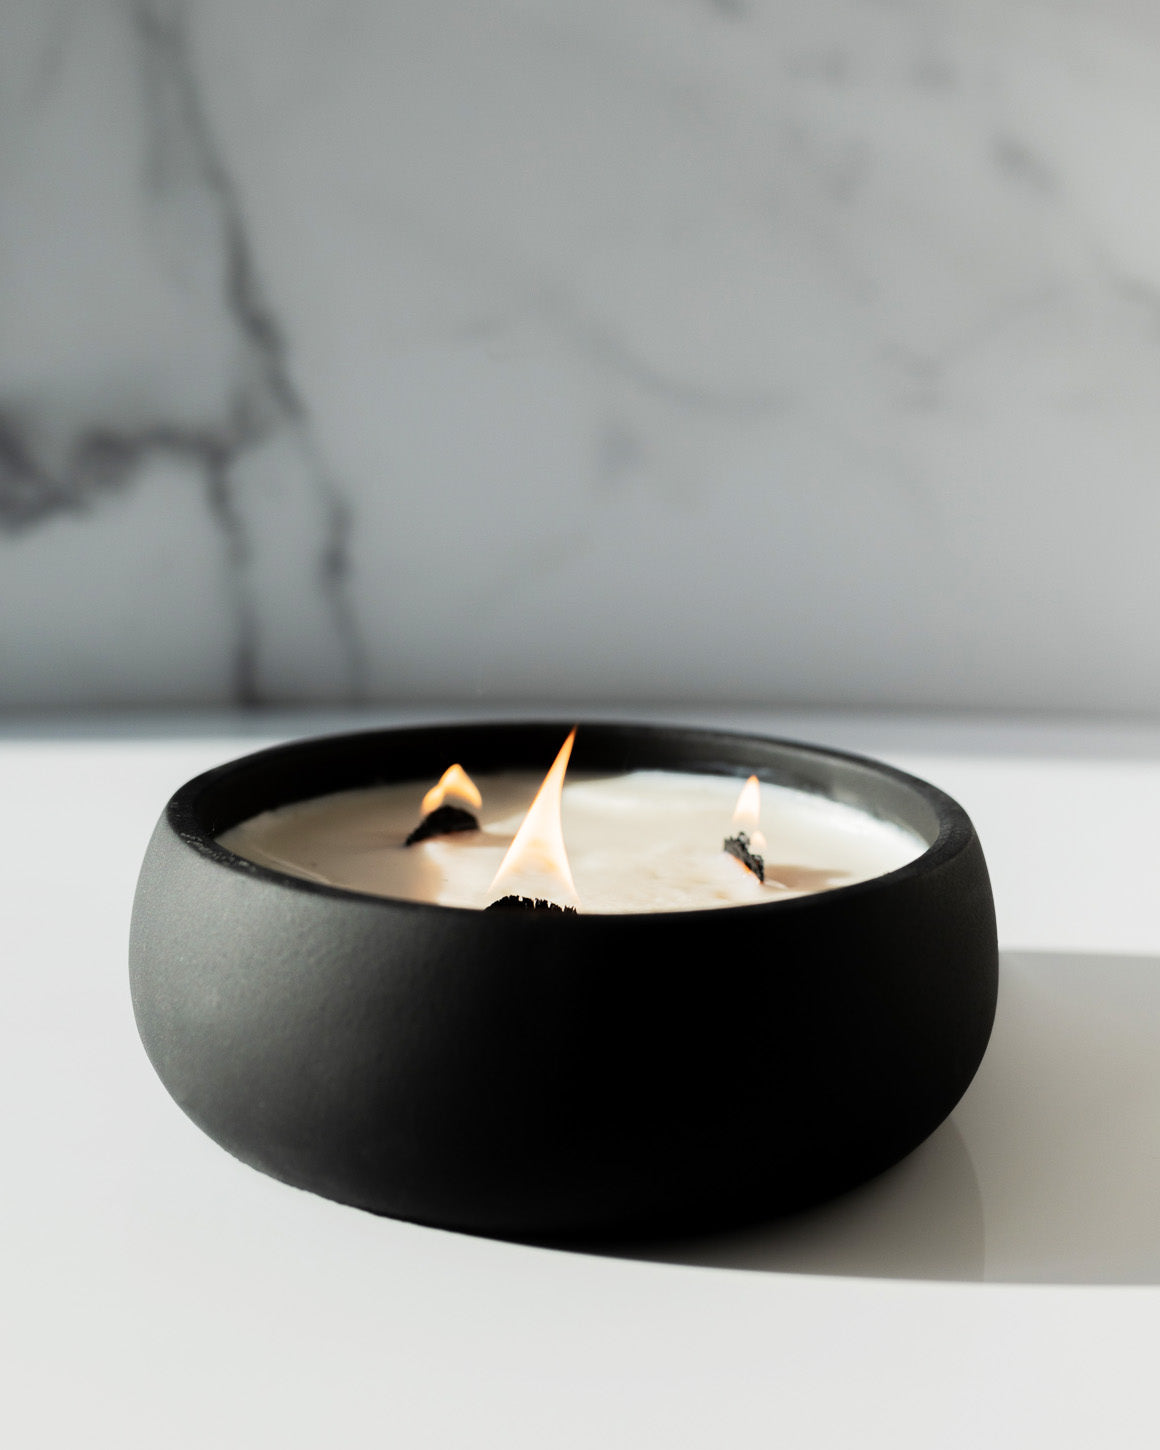 Mull It Over Coconut Soy Candle - Black Concrete Wooden Wick Vessel